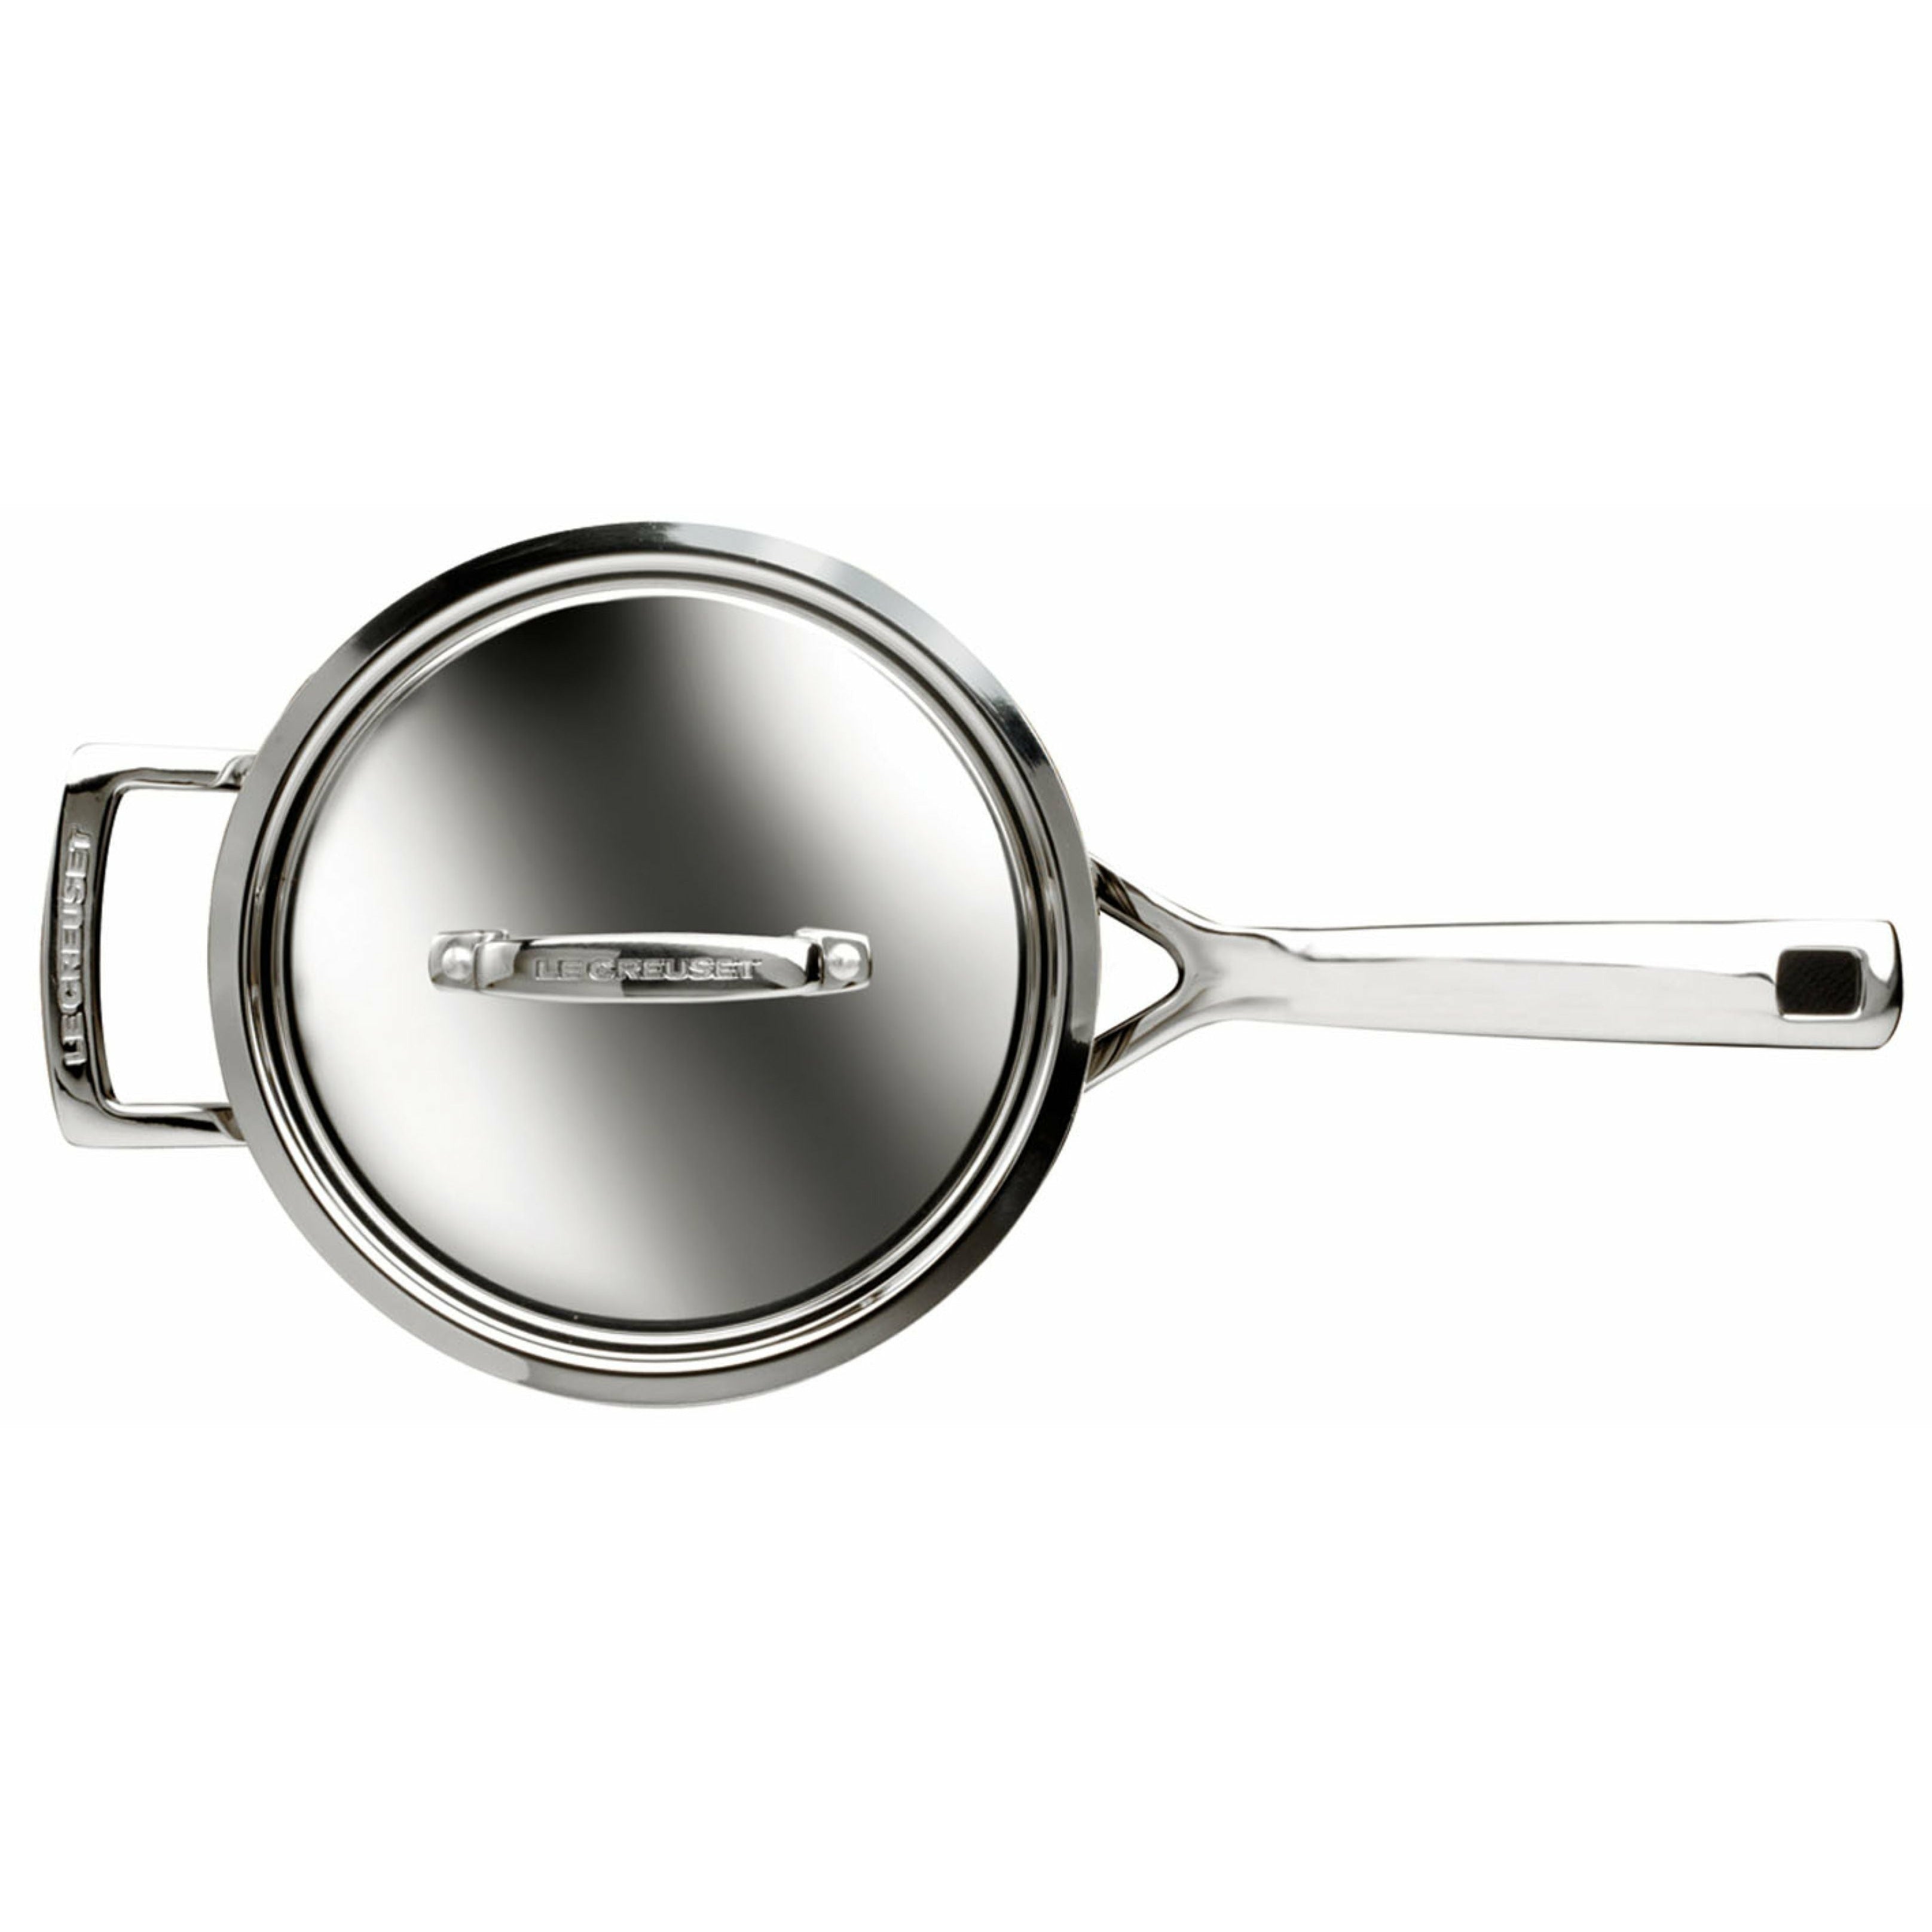 Le Creuset 3 Ply Stainless Steel Saucepan With Lid 1.9 L, 16 Cm